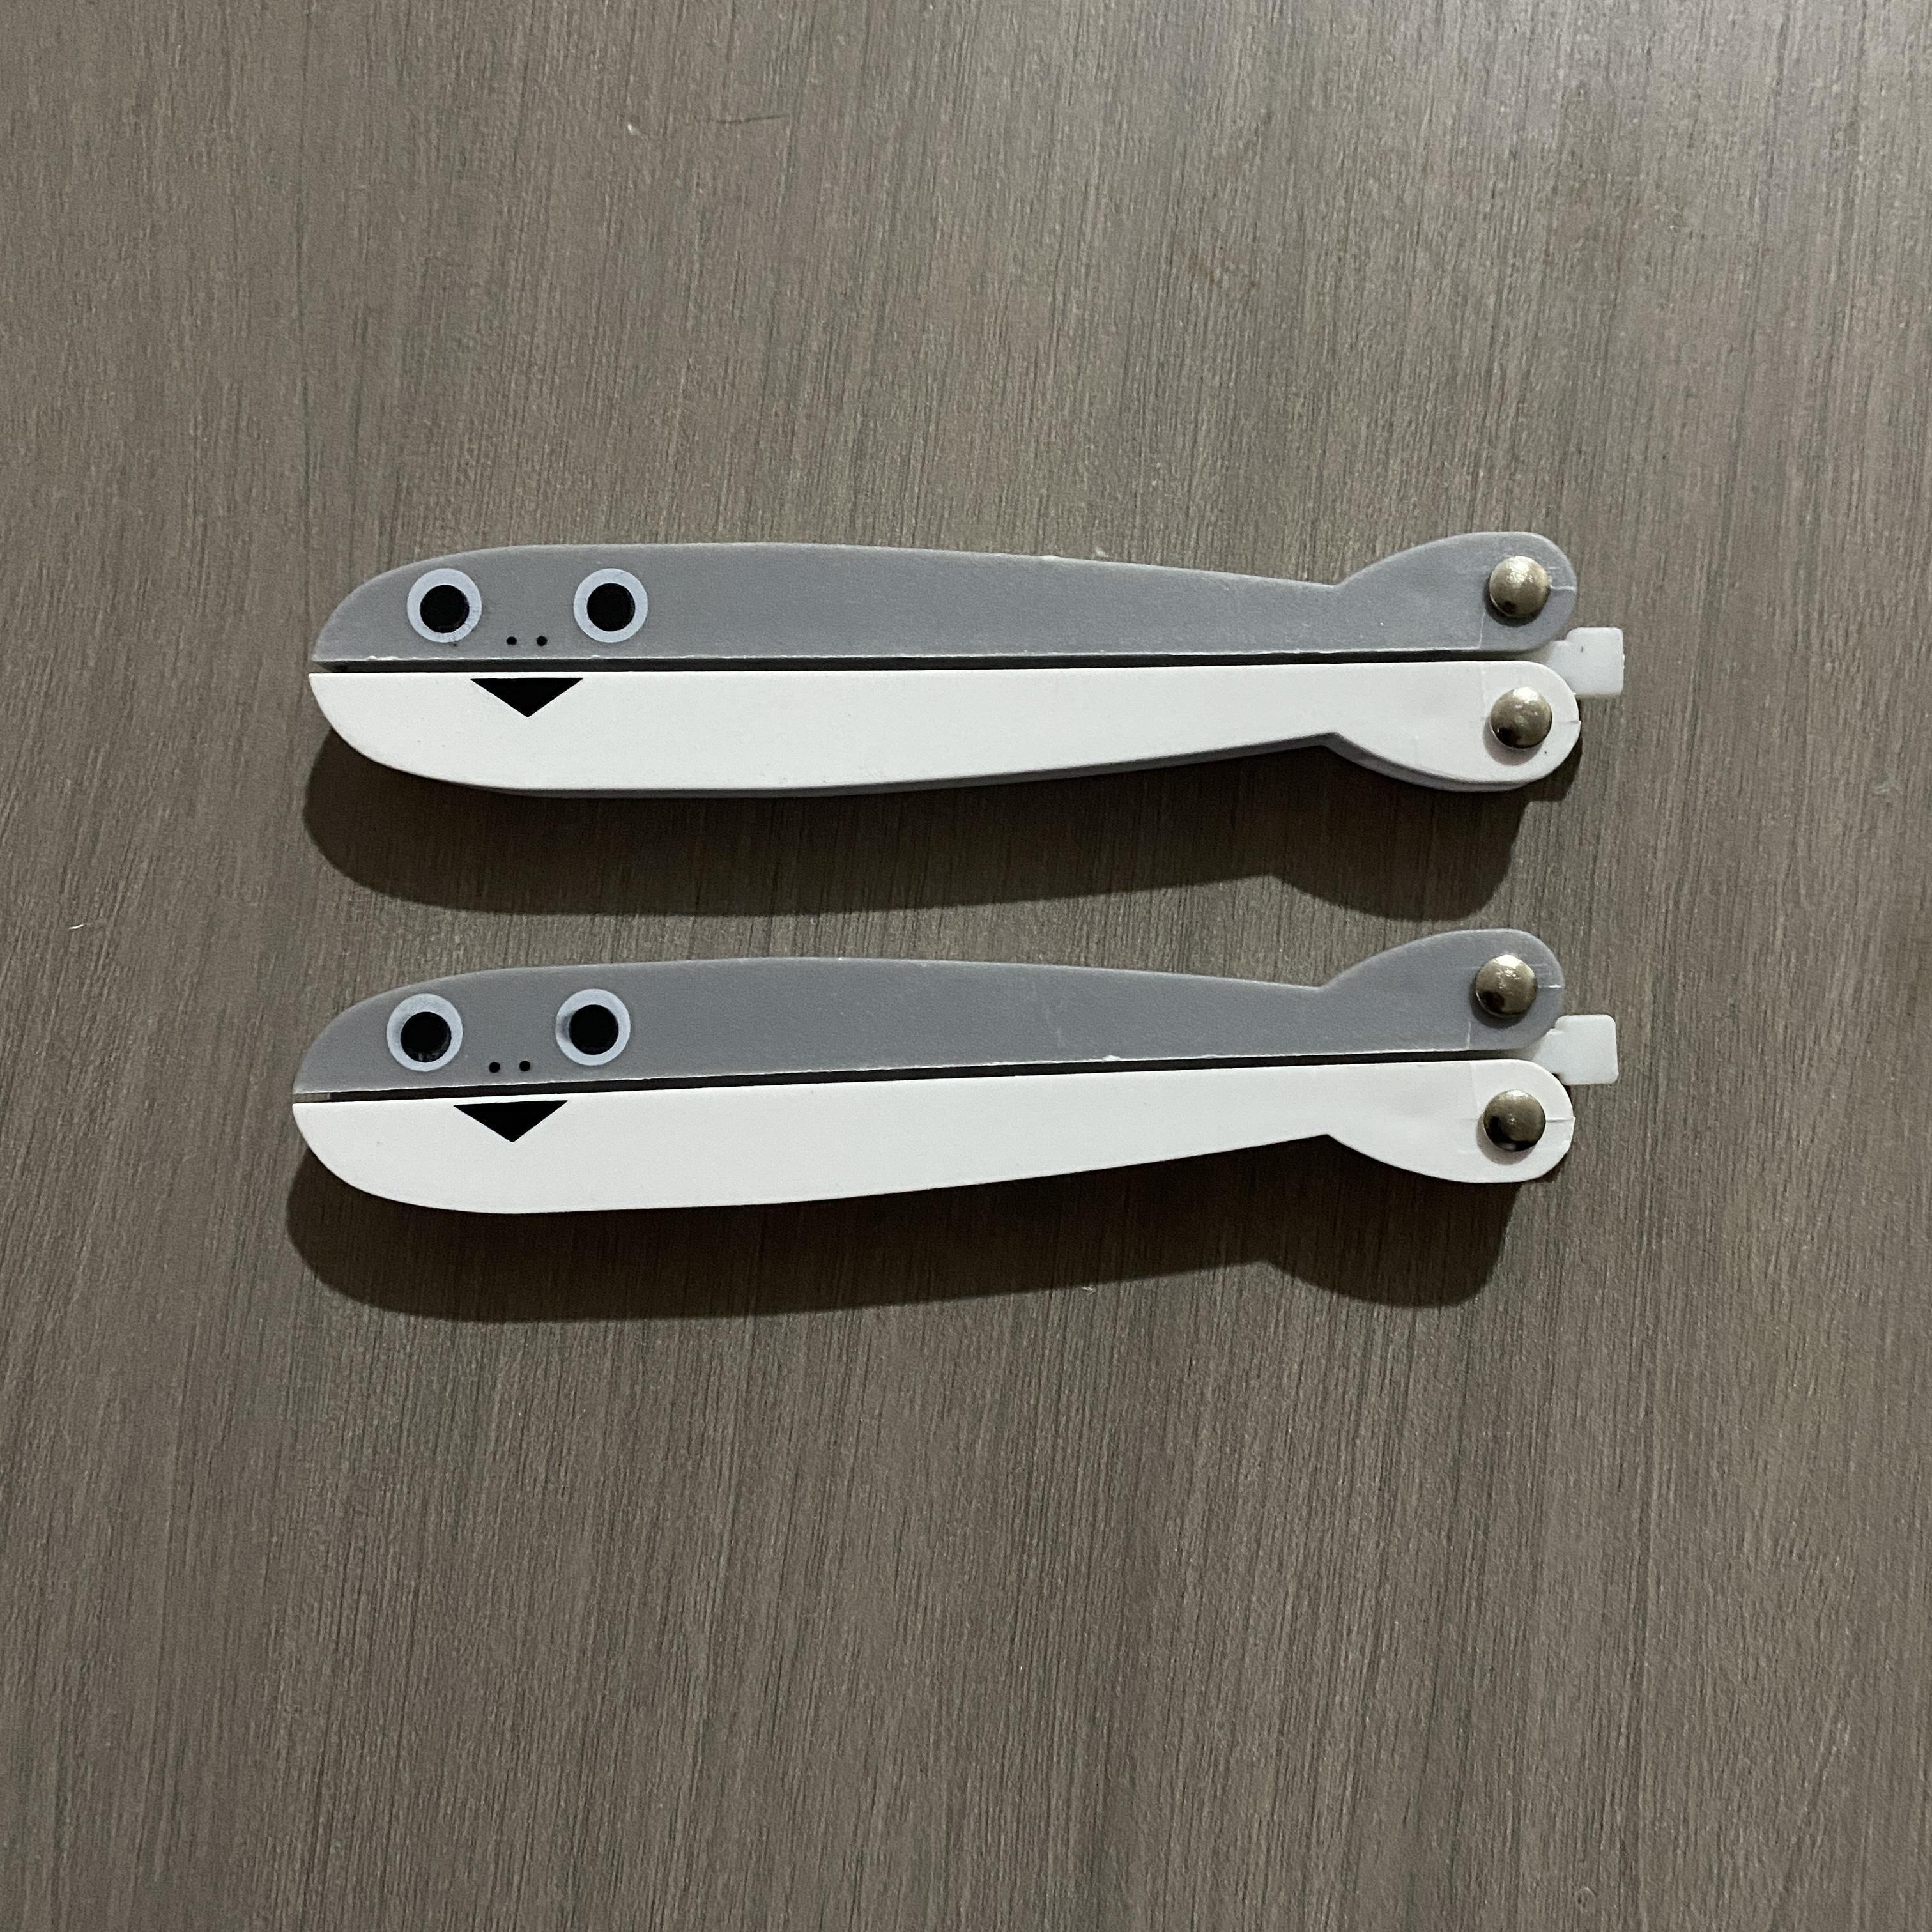 3d Printed Fish Bone Butterfly Knife Very Safe Small Toy - Temu